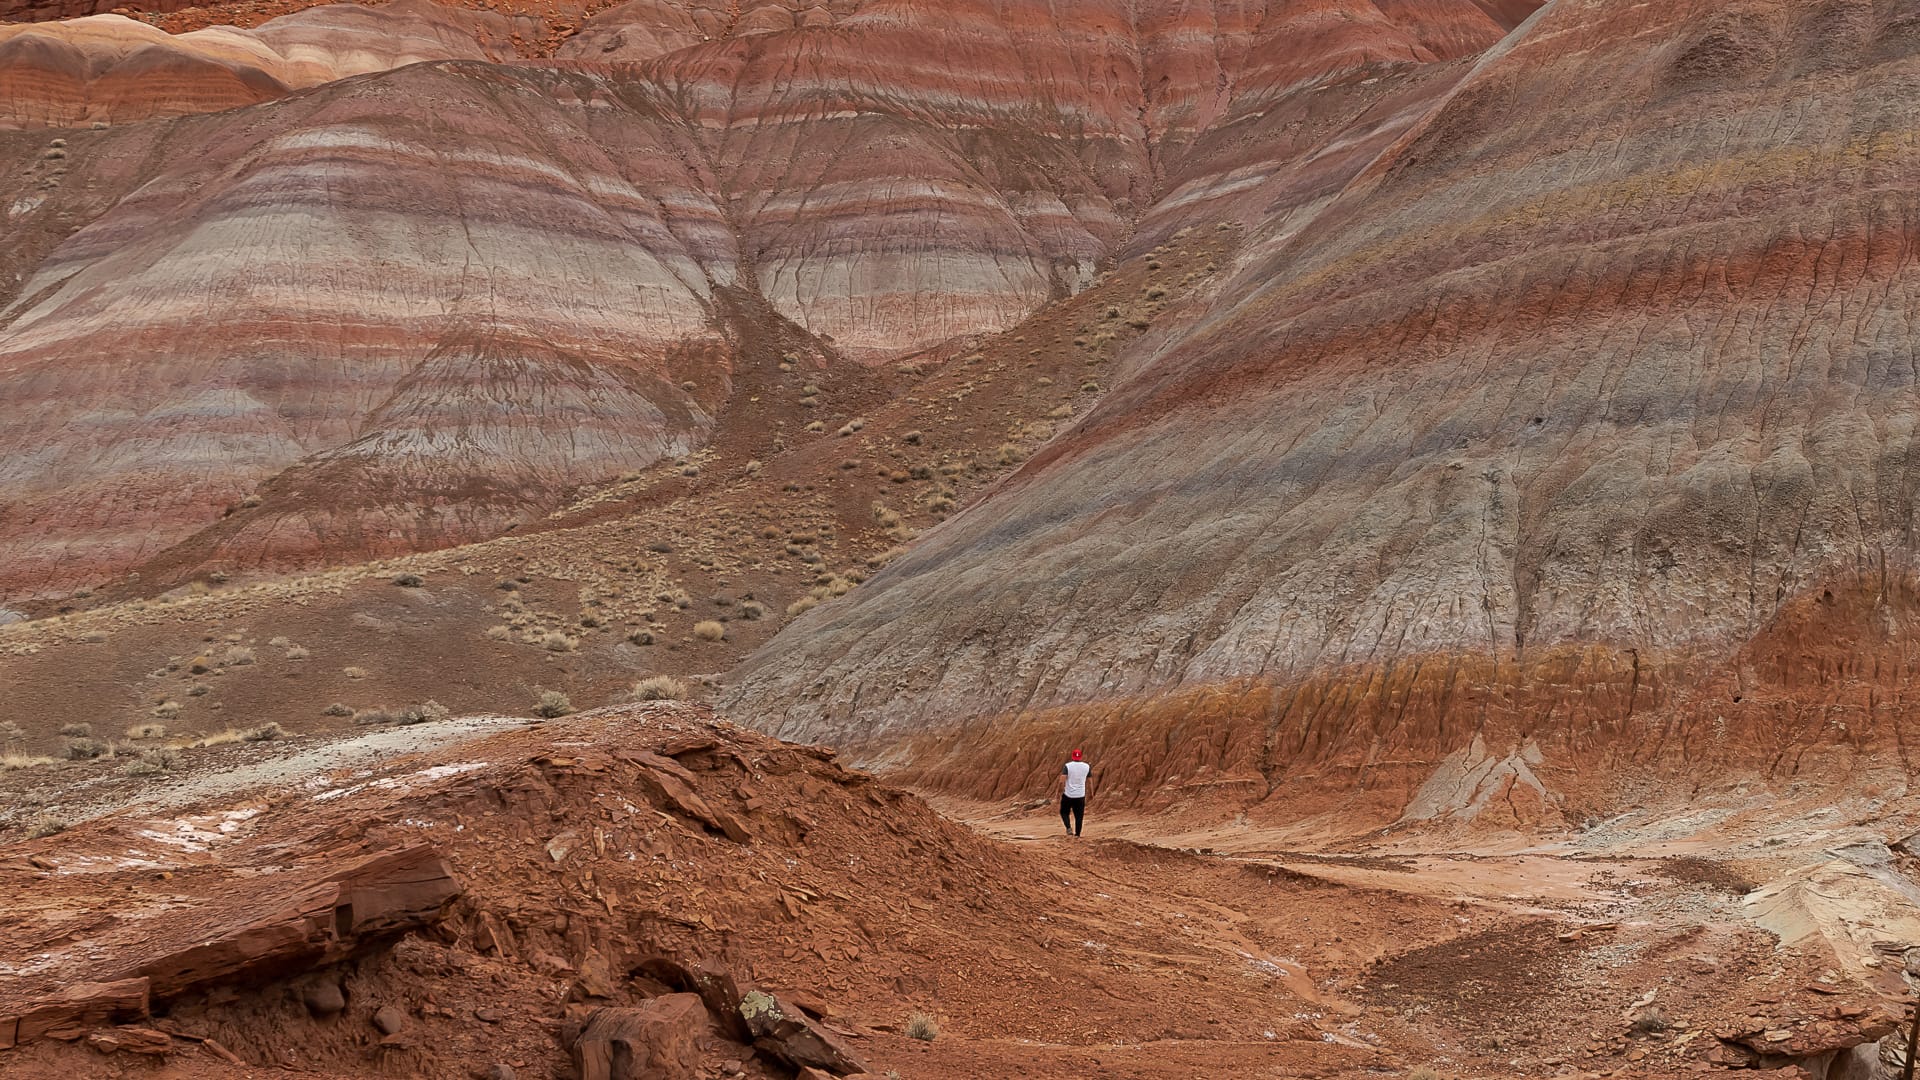 A hiker stands on an outdoor hiking trail and looks up at a rainbow-colored striped mountain in the Paria Canyon - Vermilion Cliffs Wilderness Area in Marble Canyon, Arizona